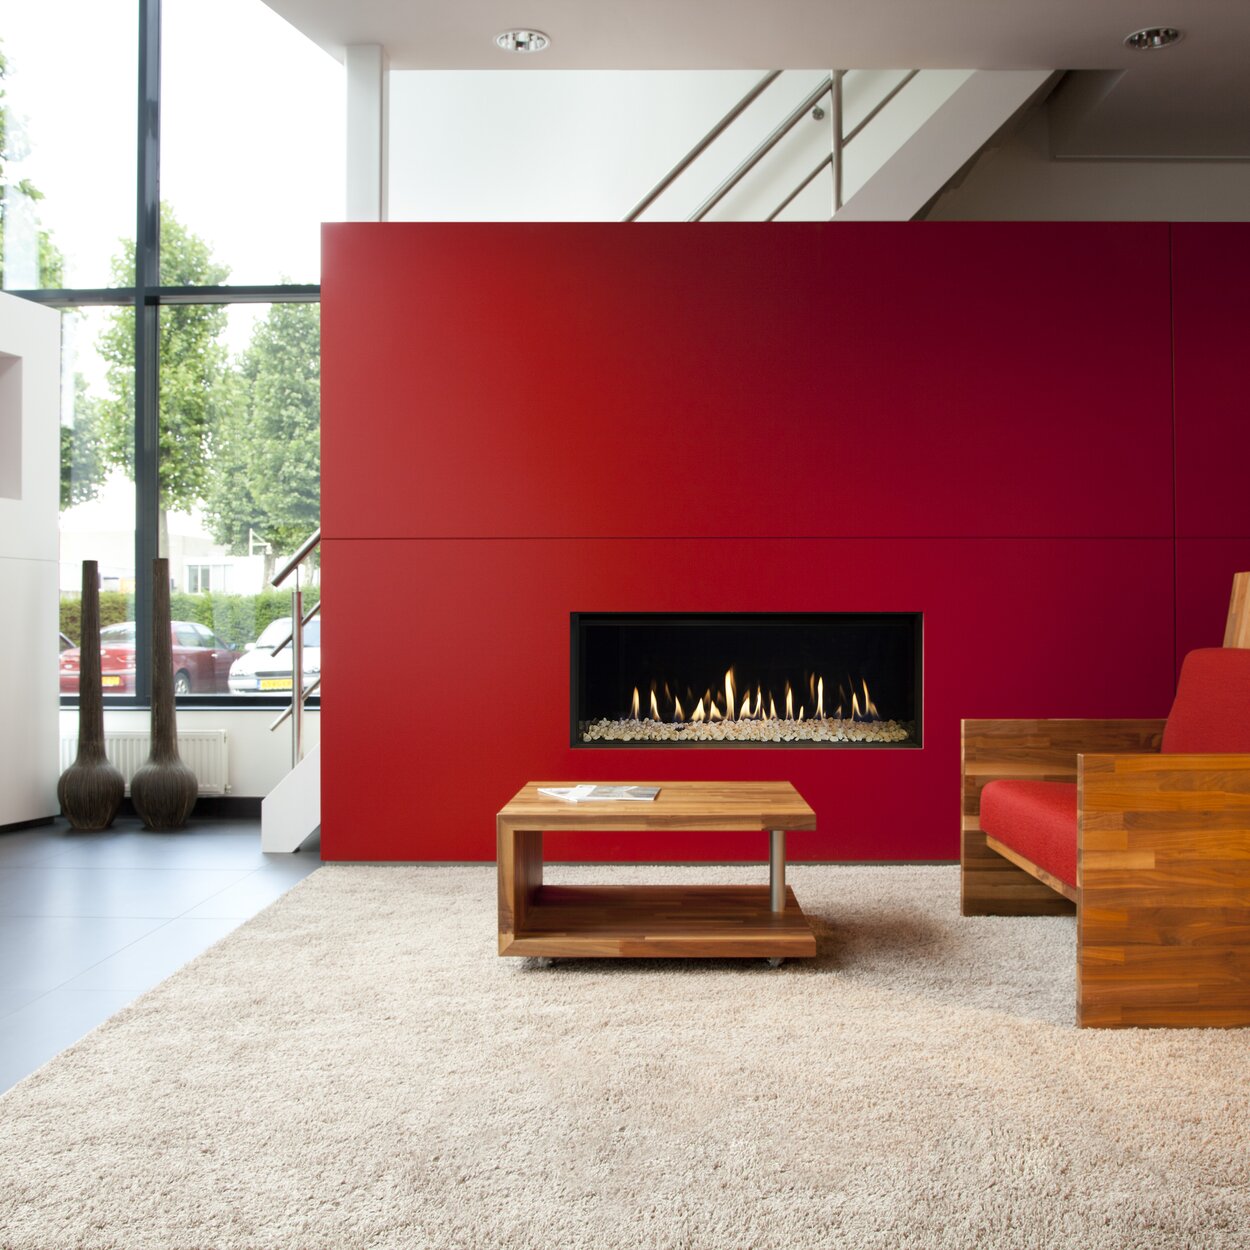 Kalfire G100/41F gas fireplace with white bricks in the firebox in a flat with red and white walls and wooden furniture